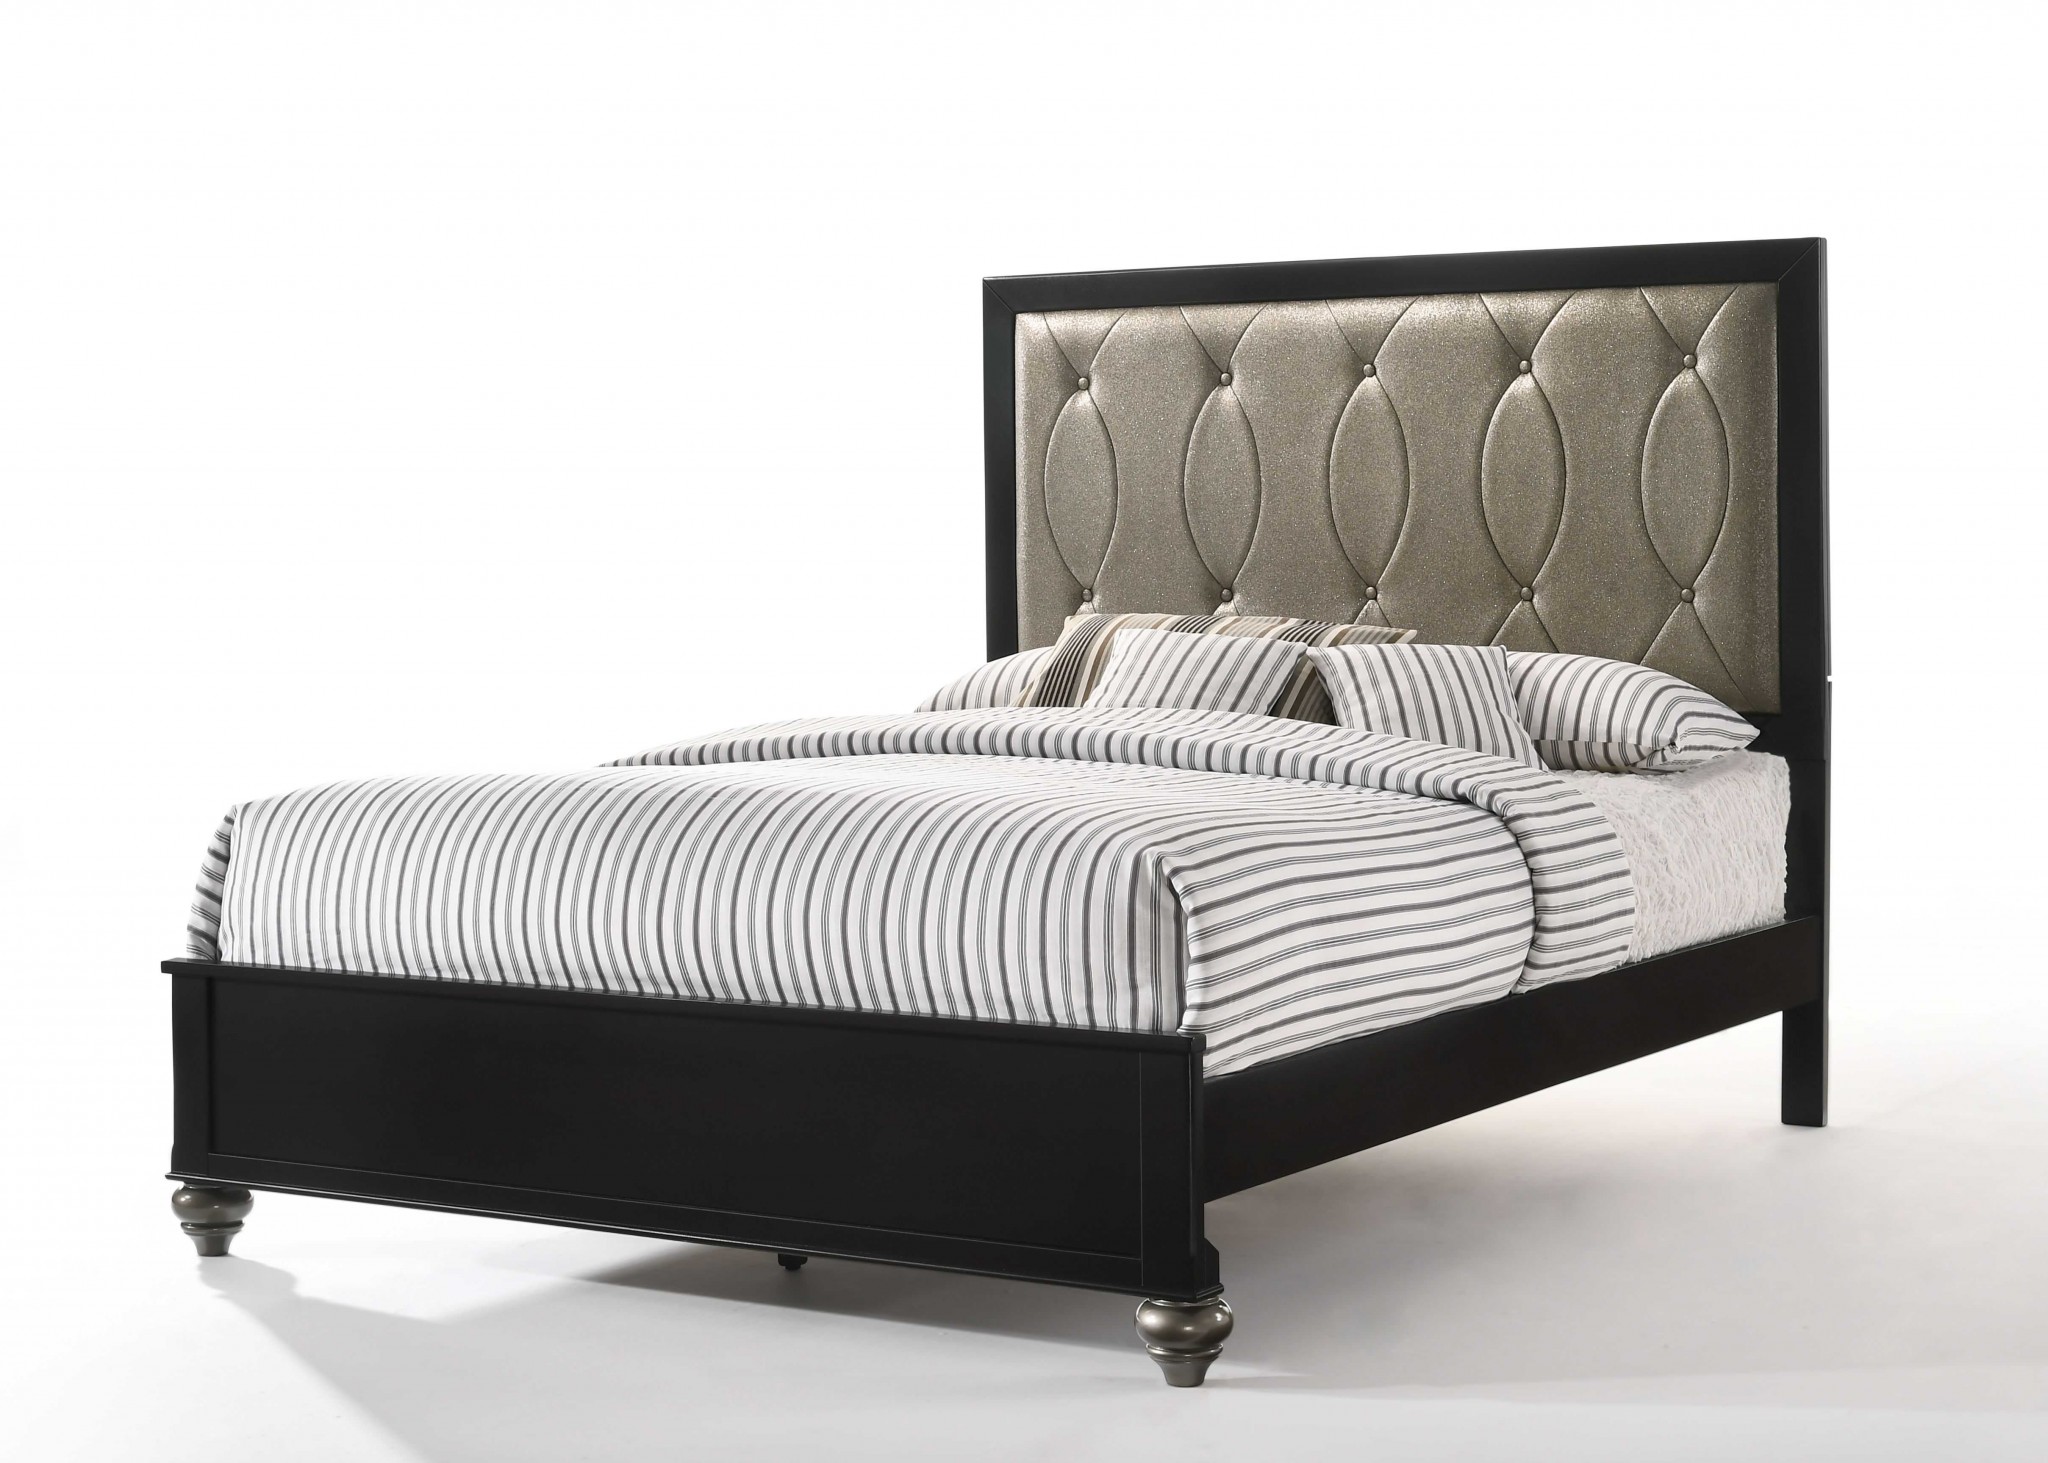 89" X 80" X 58" Copper Leatherette And Black Eastern King Bed